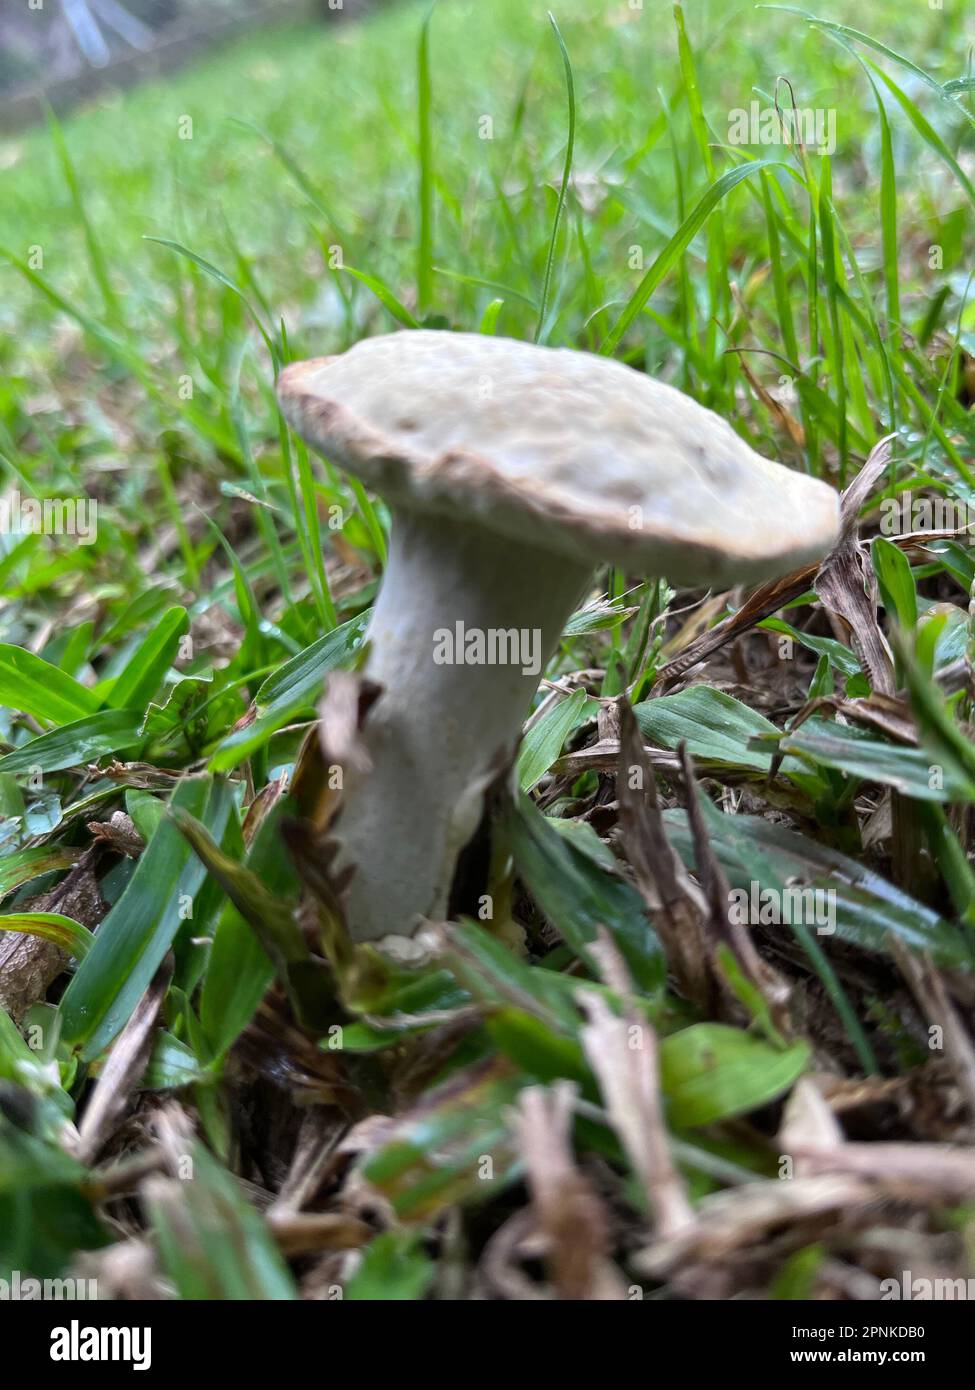 Photo of a poisonous mushroom in the garden Stock Photo